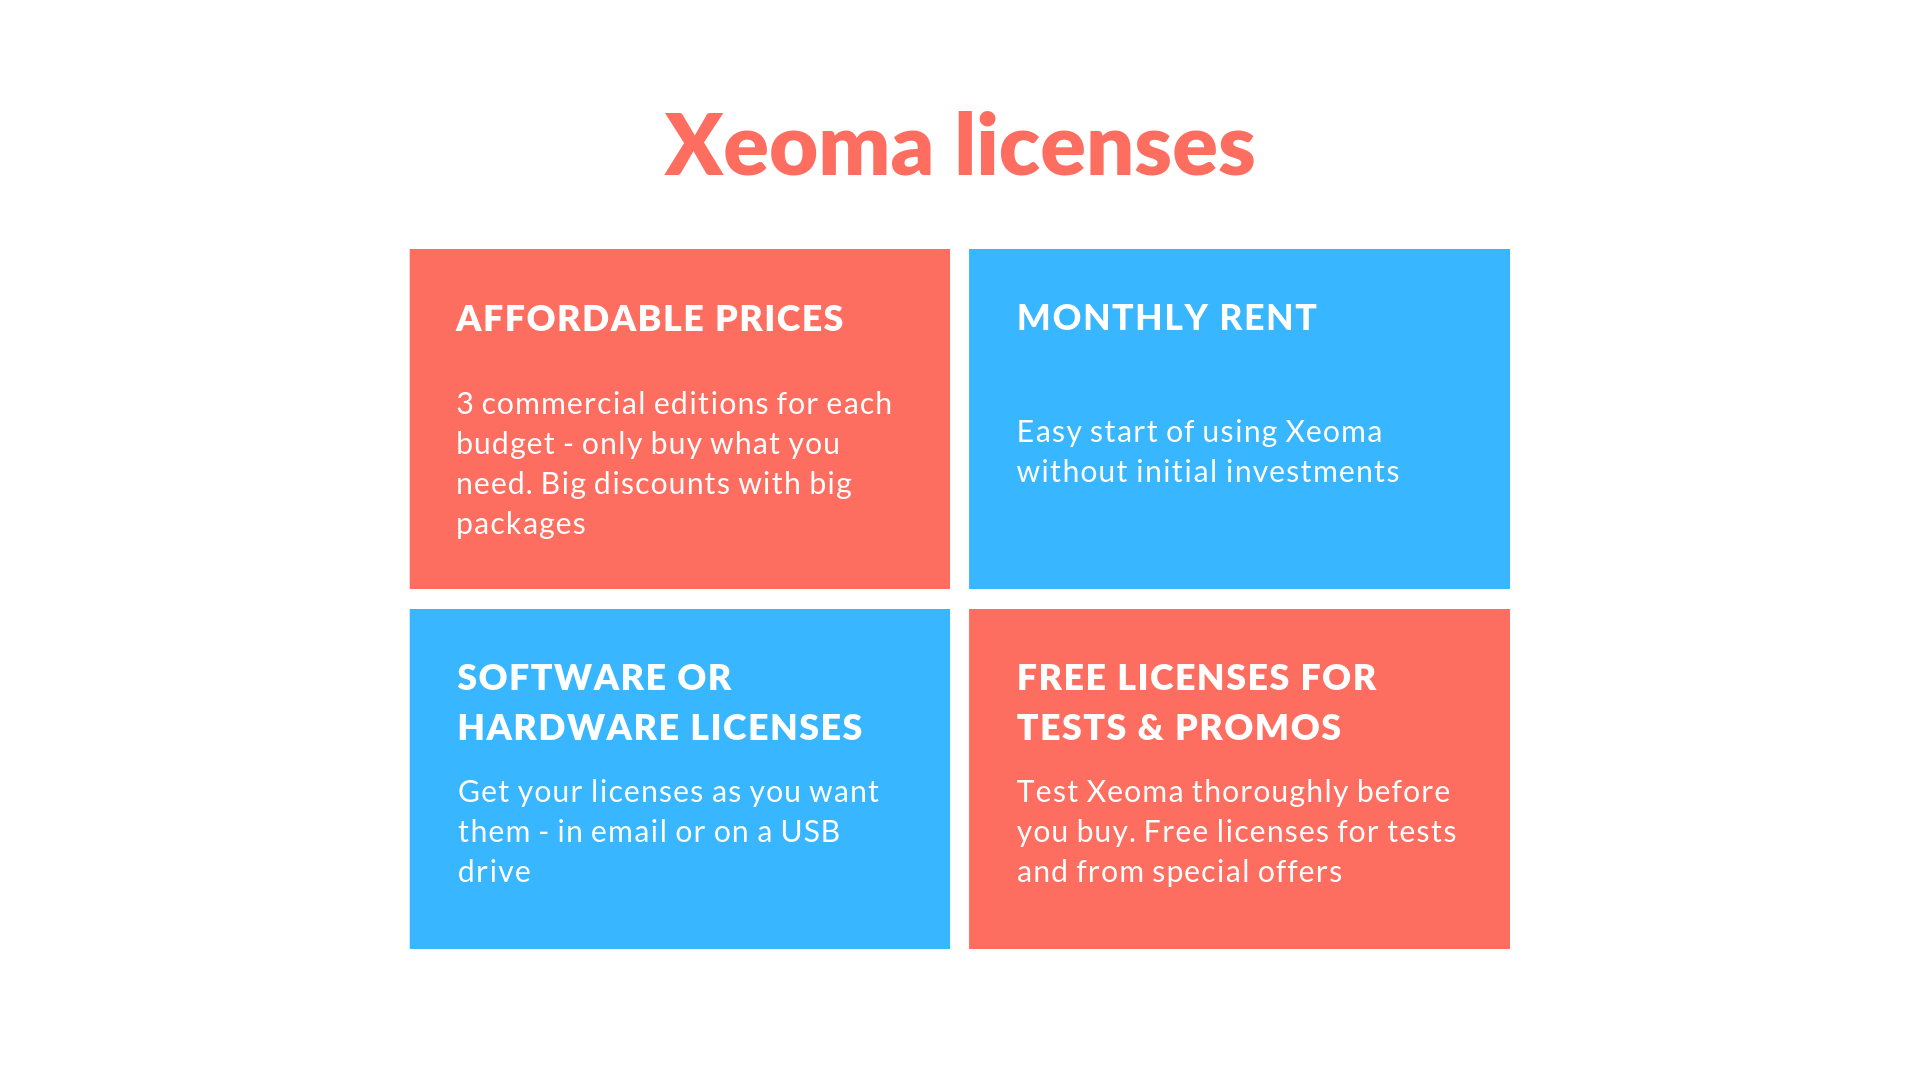 xeoma_best_software_surveillance_affordable_prices.png